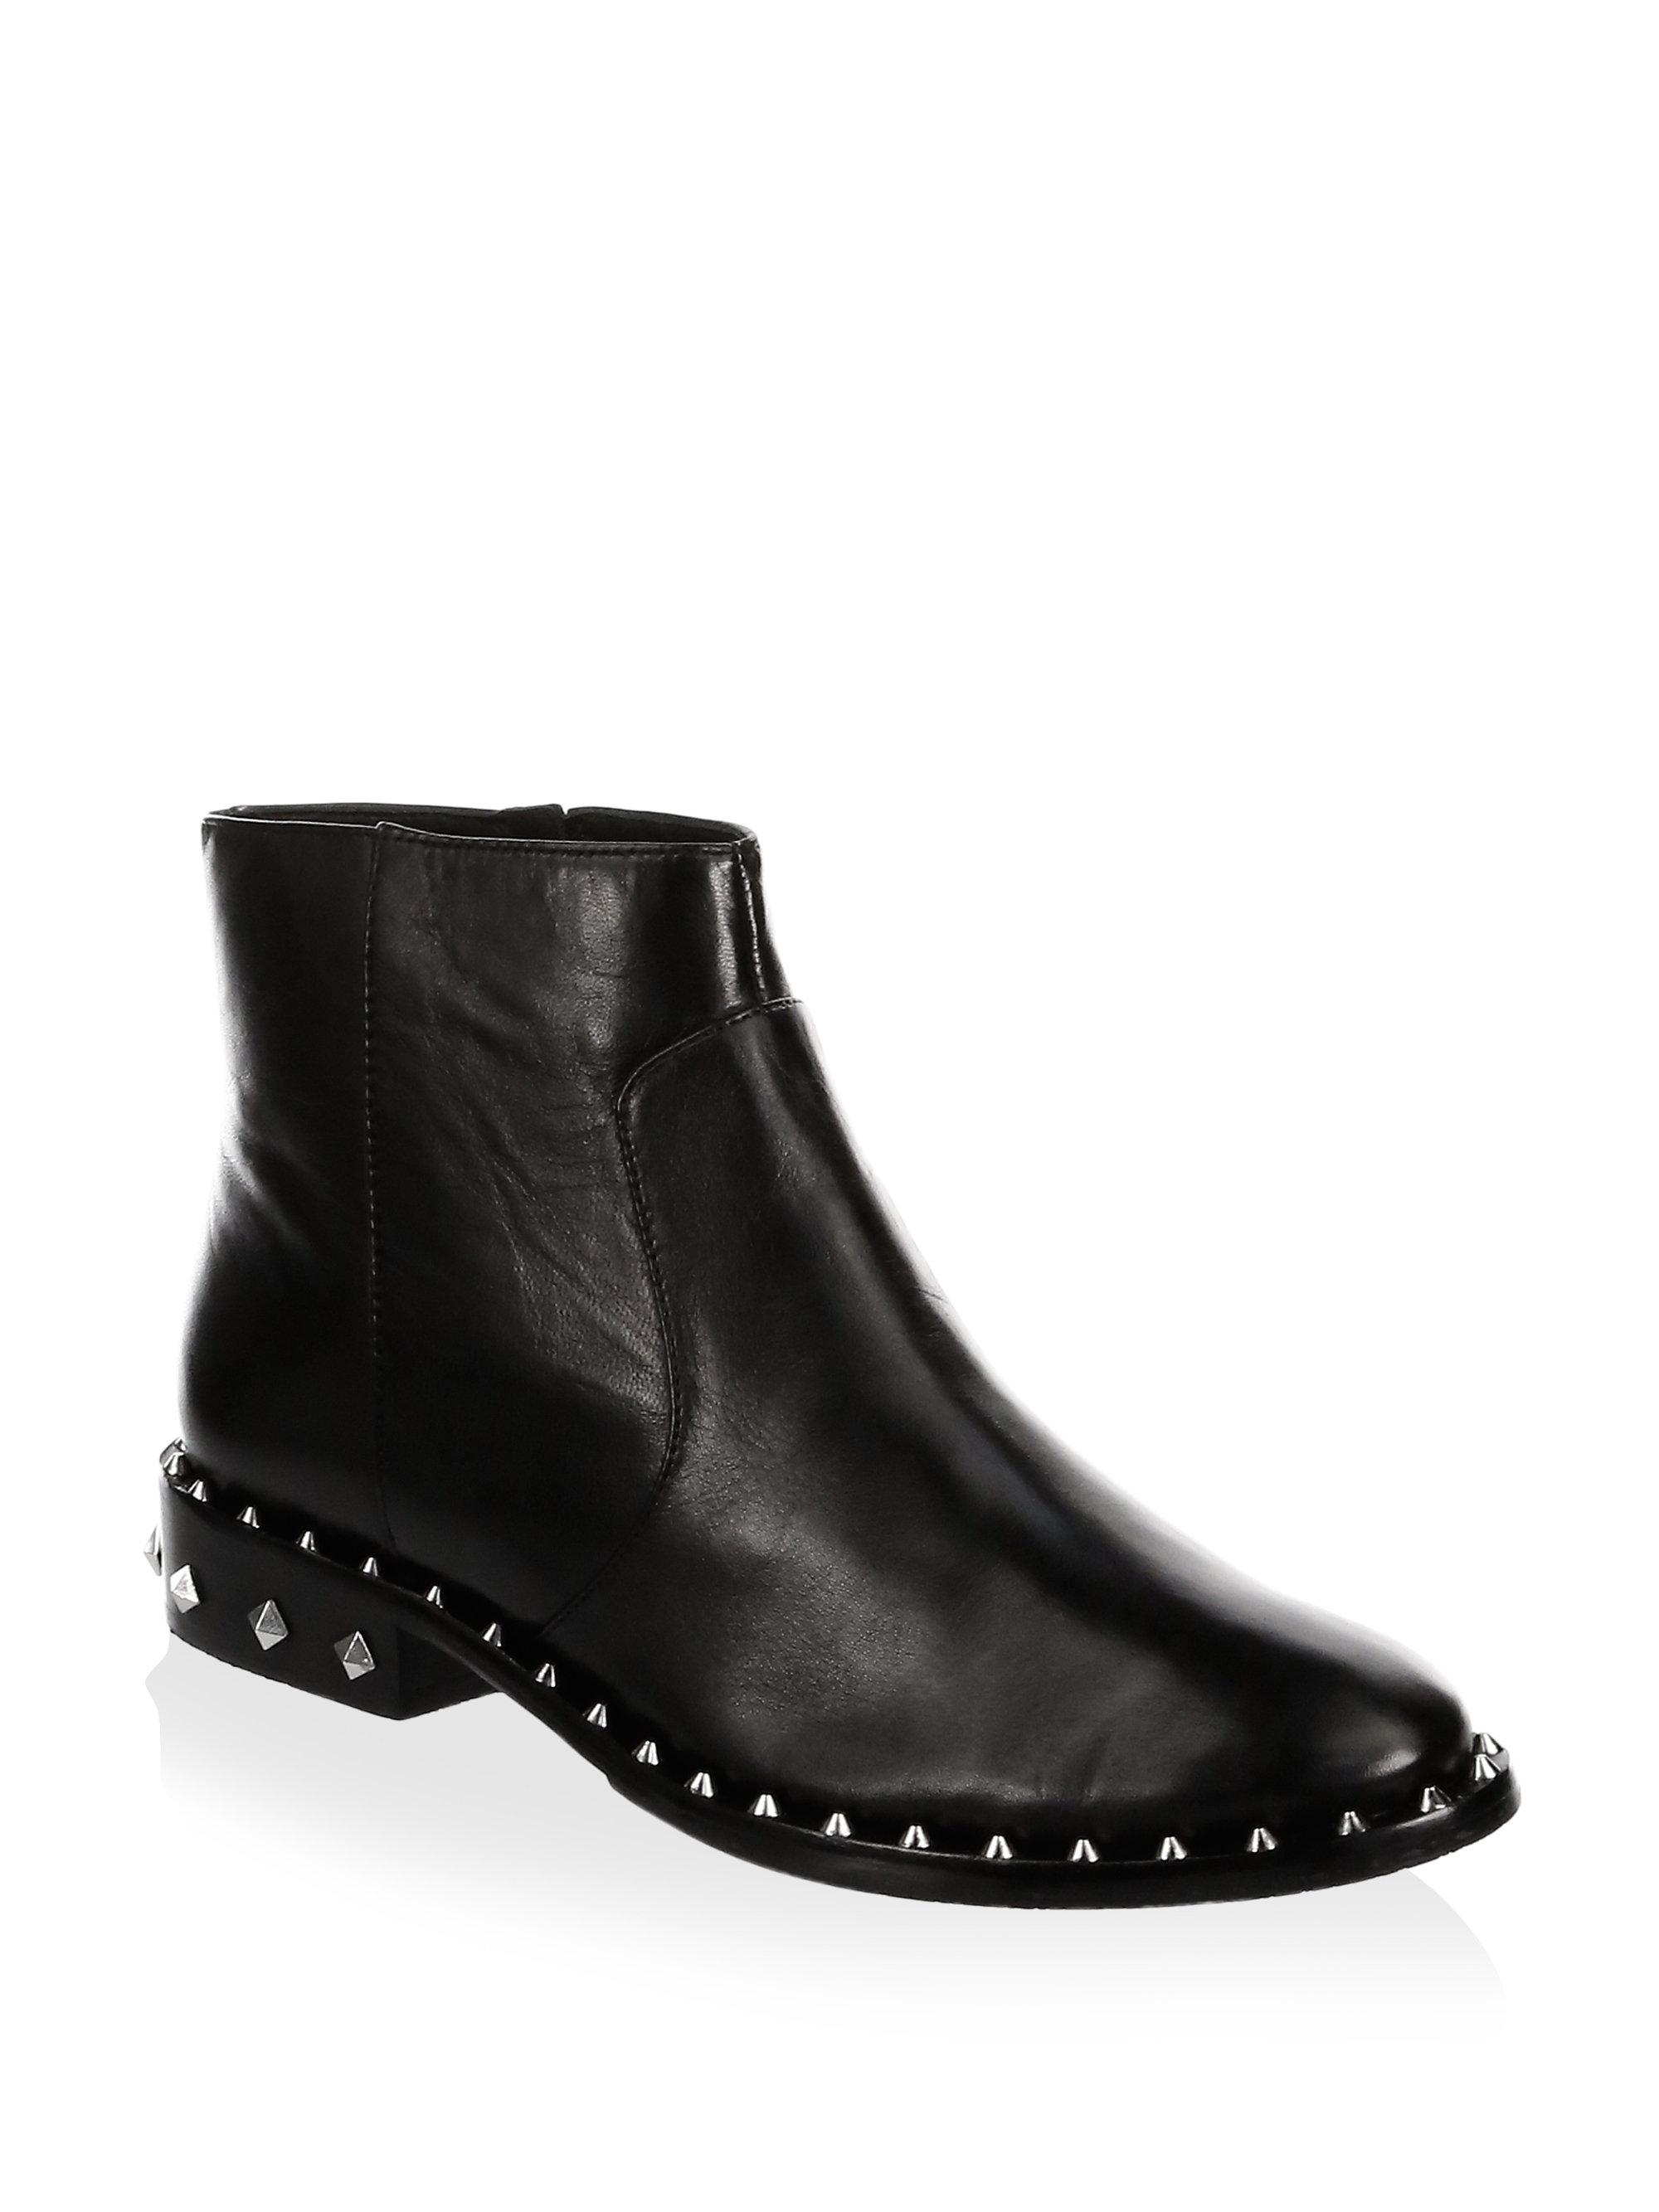 Schutz Studded Leather Boots in Black - Lyst